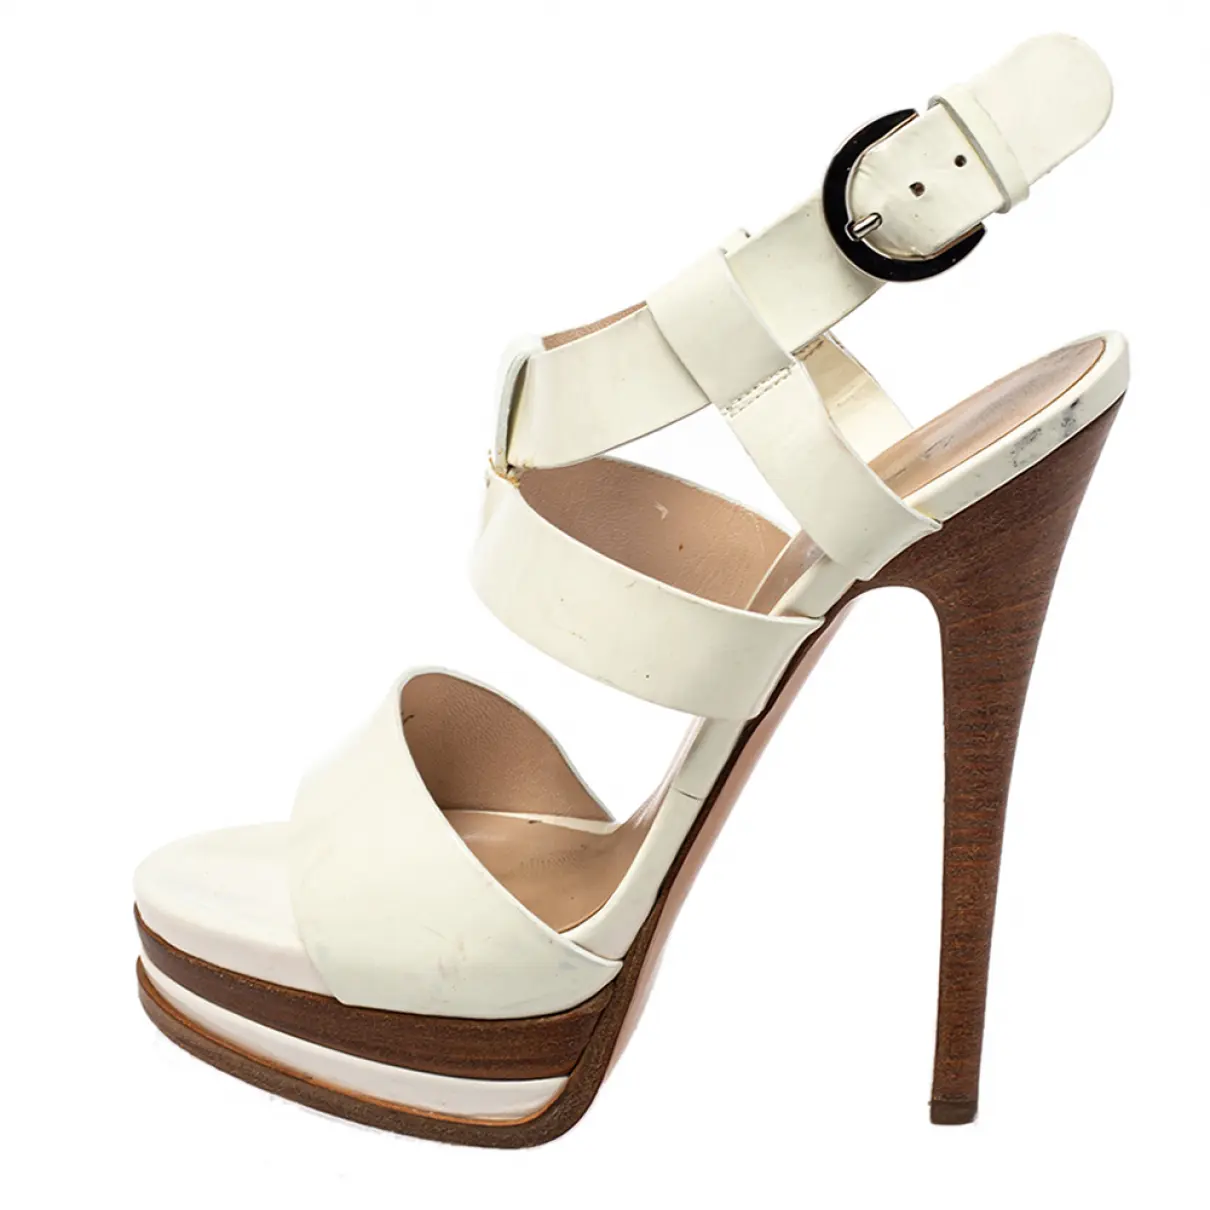 Buy Casadei Patent leather sandals online